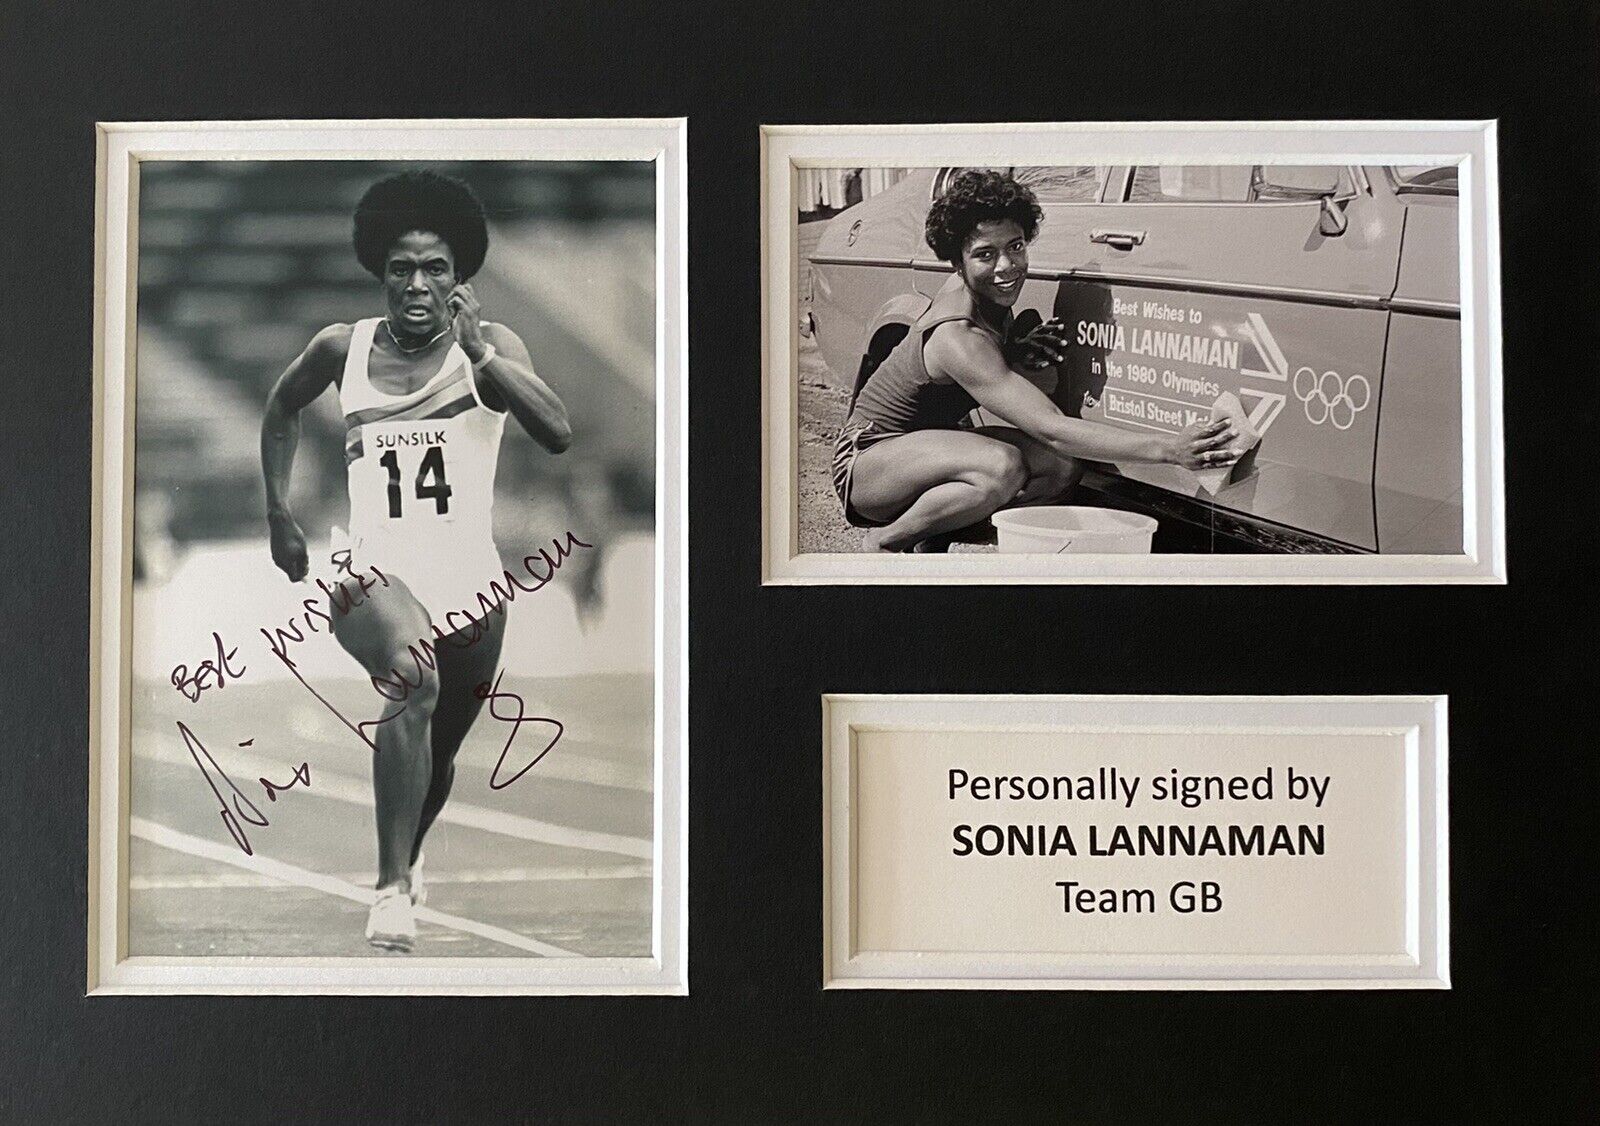 Sonia Lannaman Hand Signed Photo Poster painting In A4 Mount Display - Olympics - Team GB